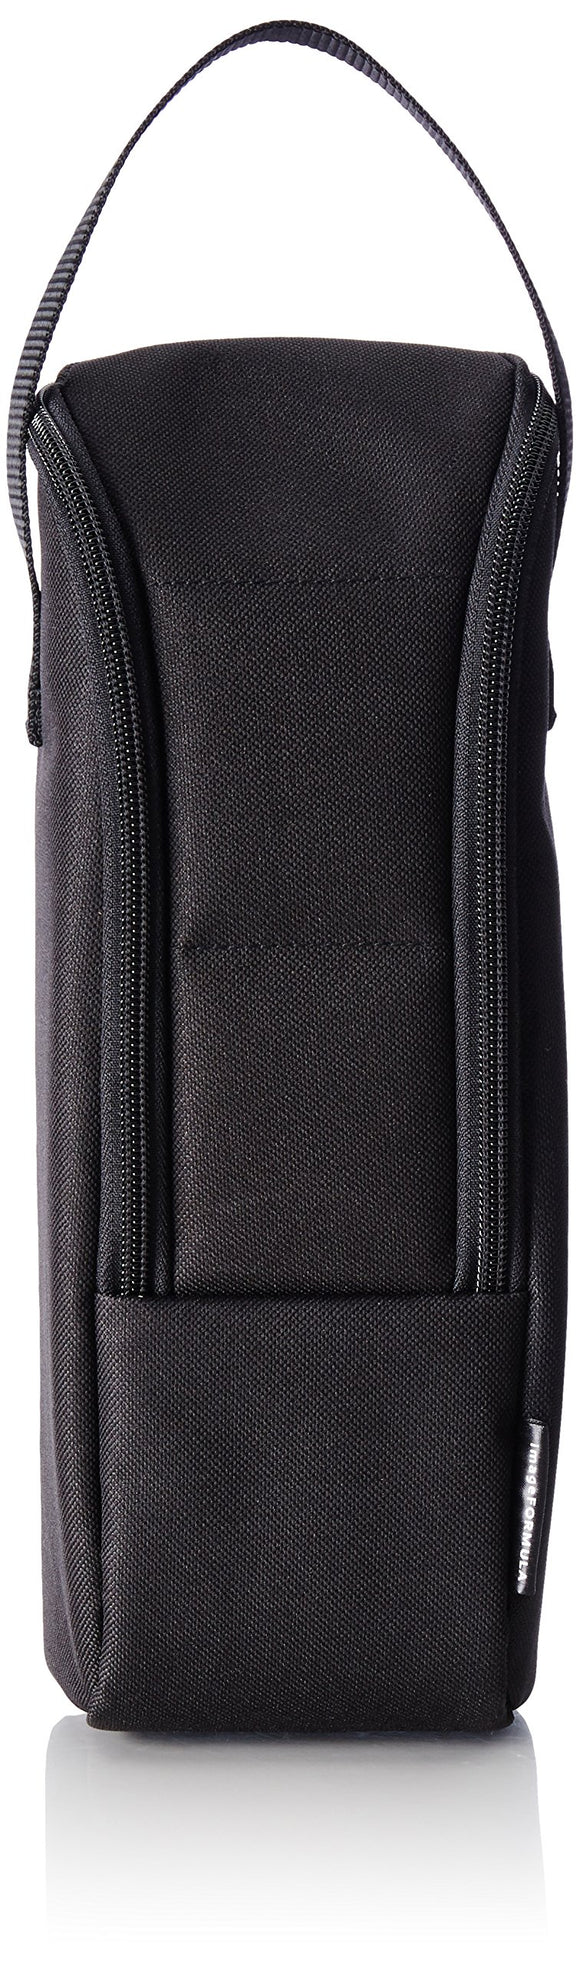 Soft Carrying Case for P-150/P-150m/P-215